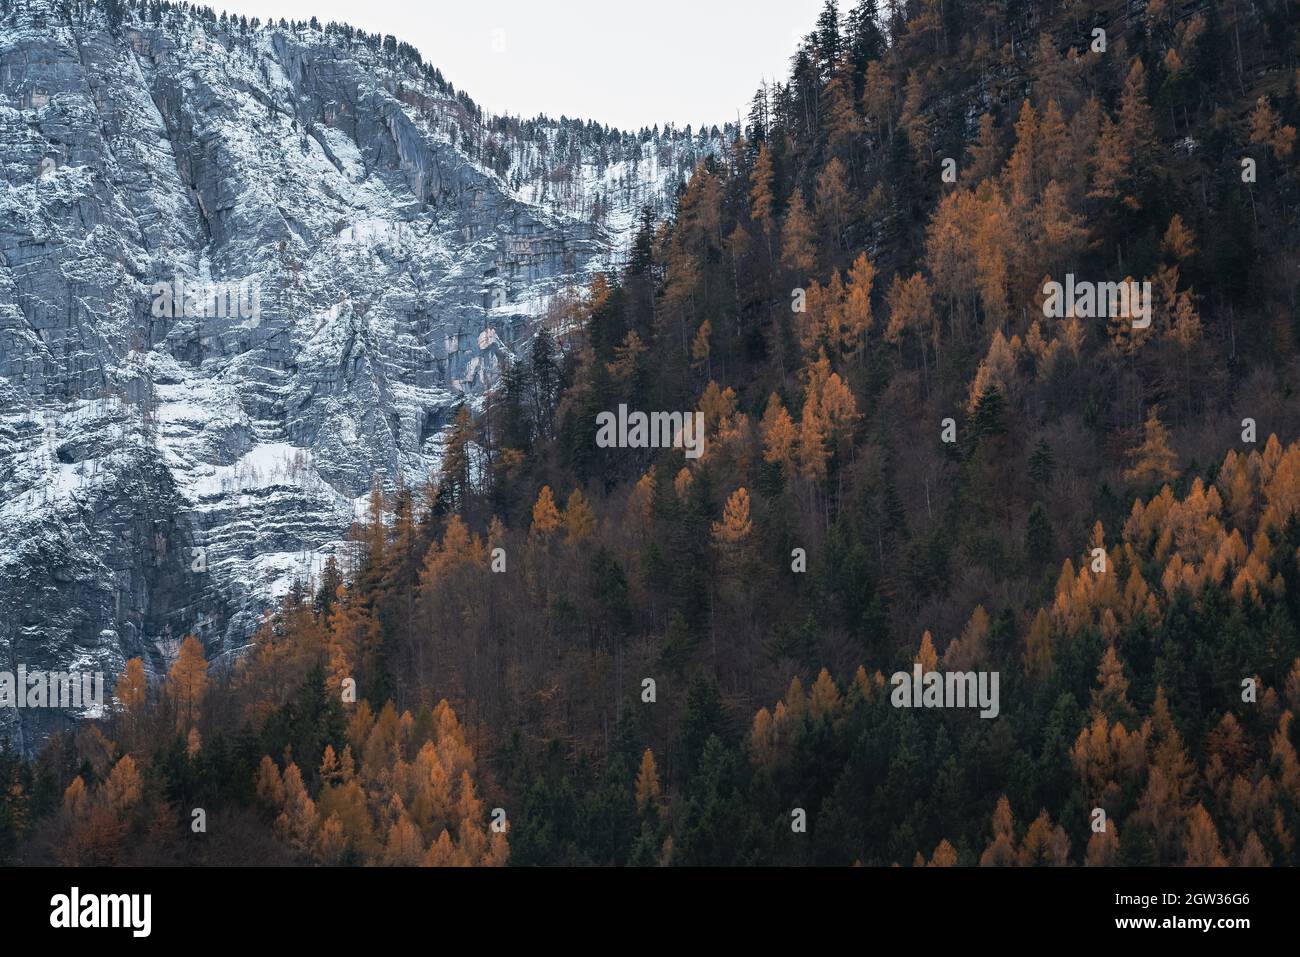 Contrast of mountains with autumn vegetation and with snow - Hallstatt, Austria Stock Photo